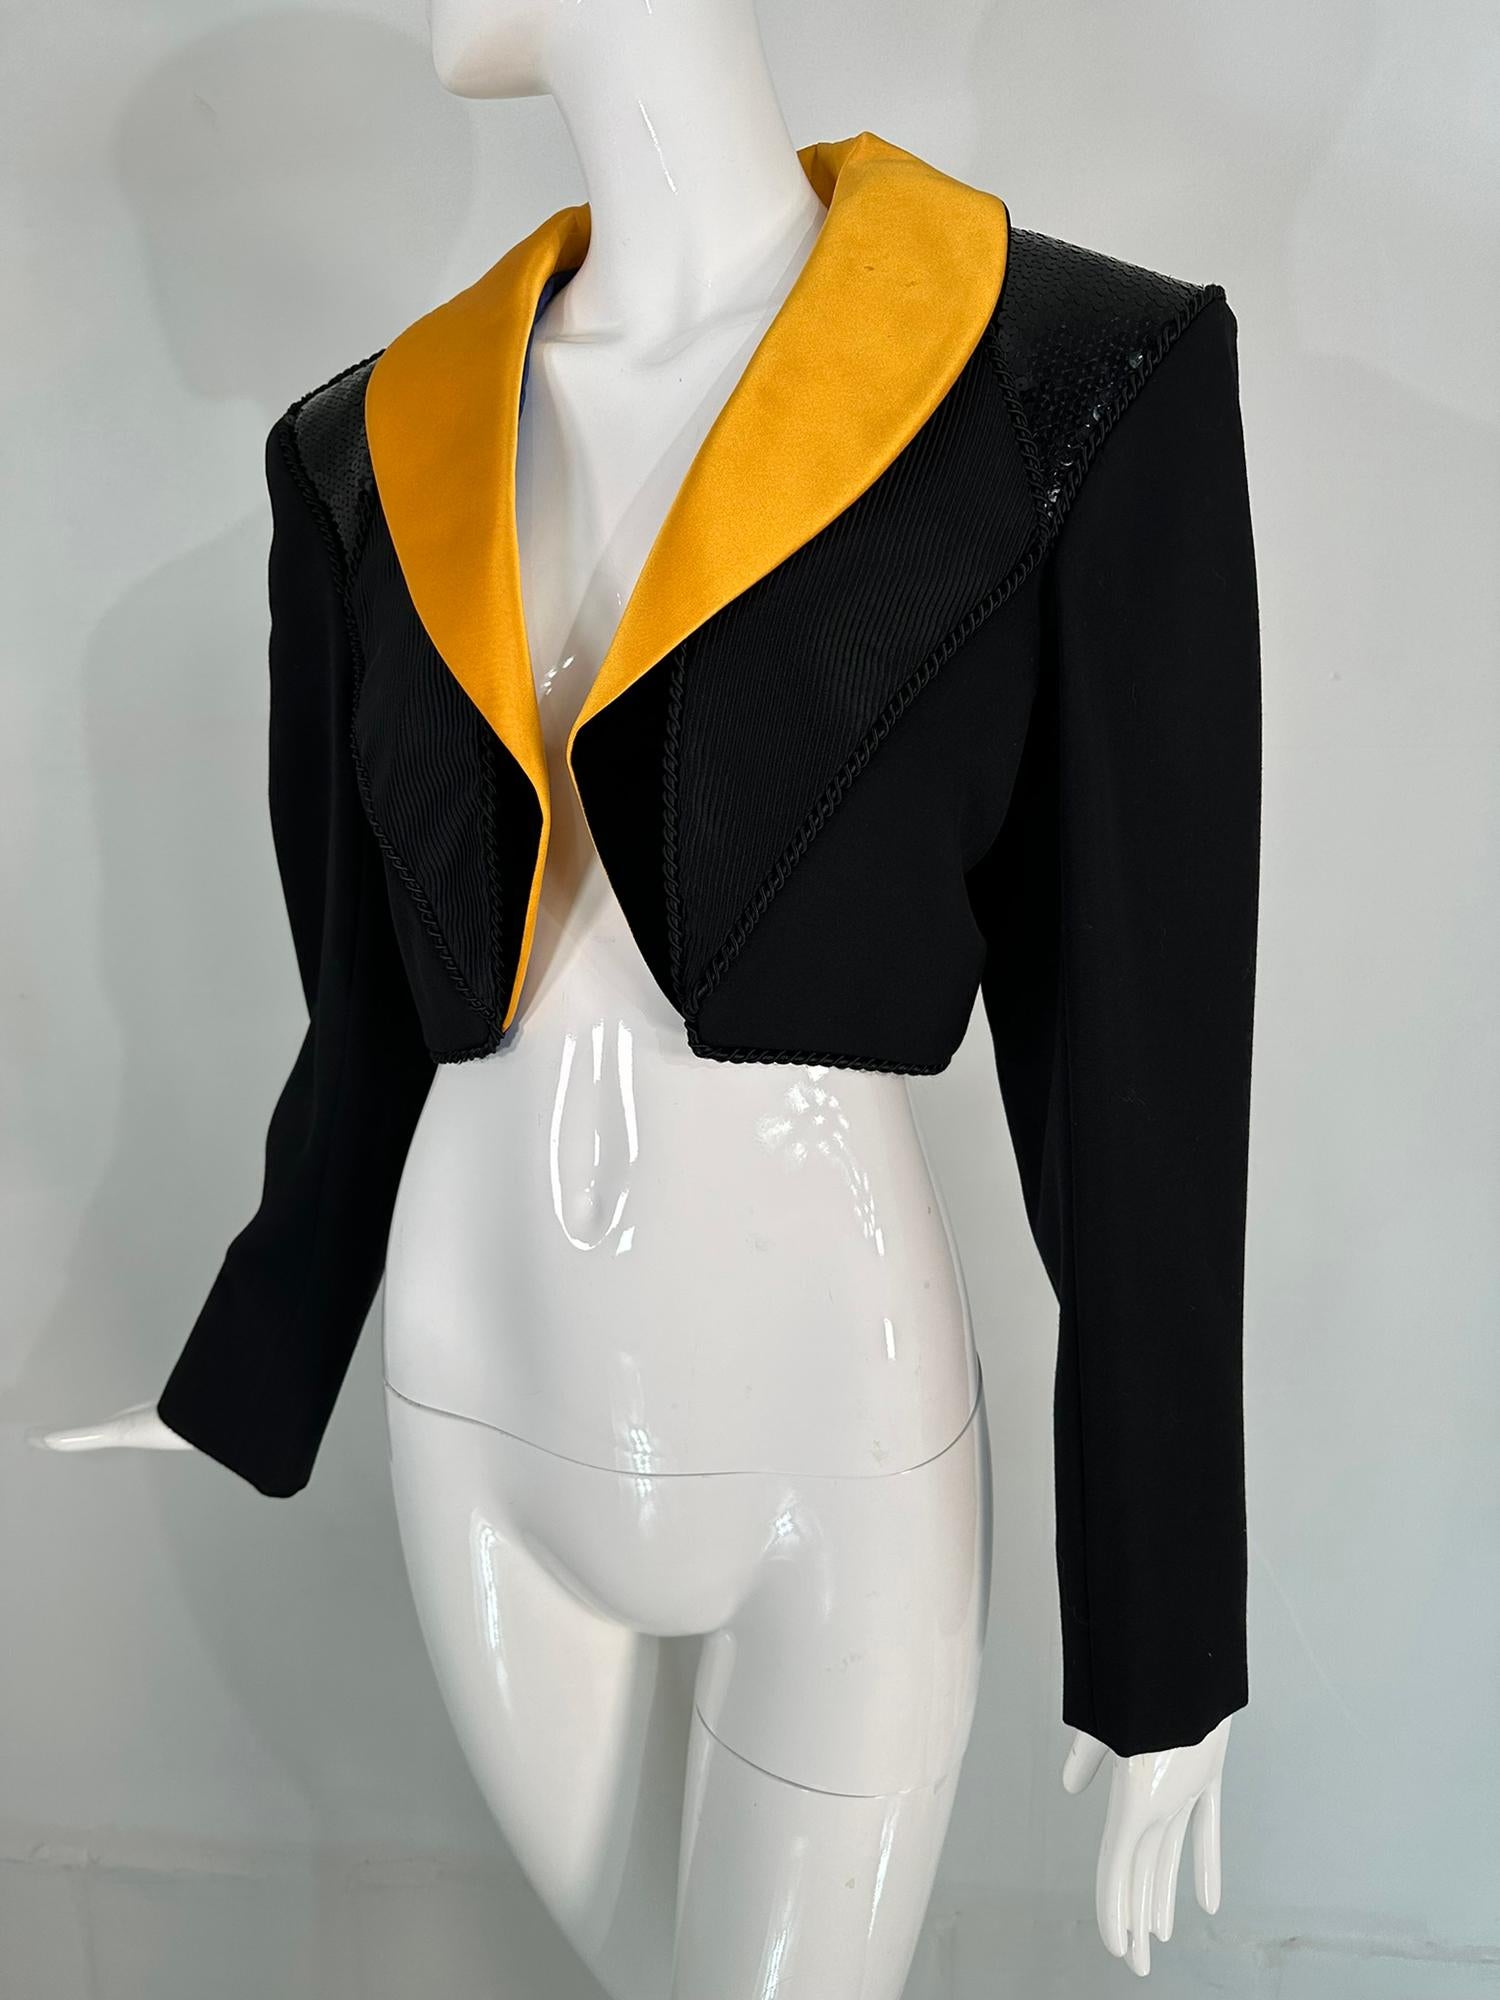  Yves Saint Laurent Rive Gauche black gabardine cropped  jacket from the early 1990s. This beautiful jacket has a shawl collar done in bright yellow-orange satin,  lined in bright blue satin, the combination is vivid. Fine black wool gabardine the